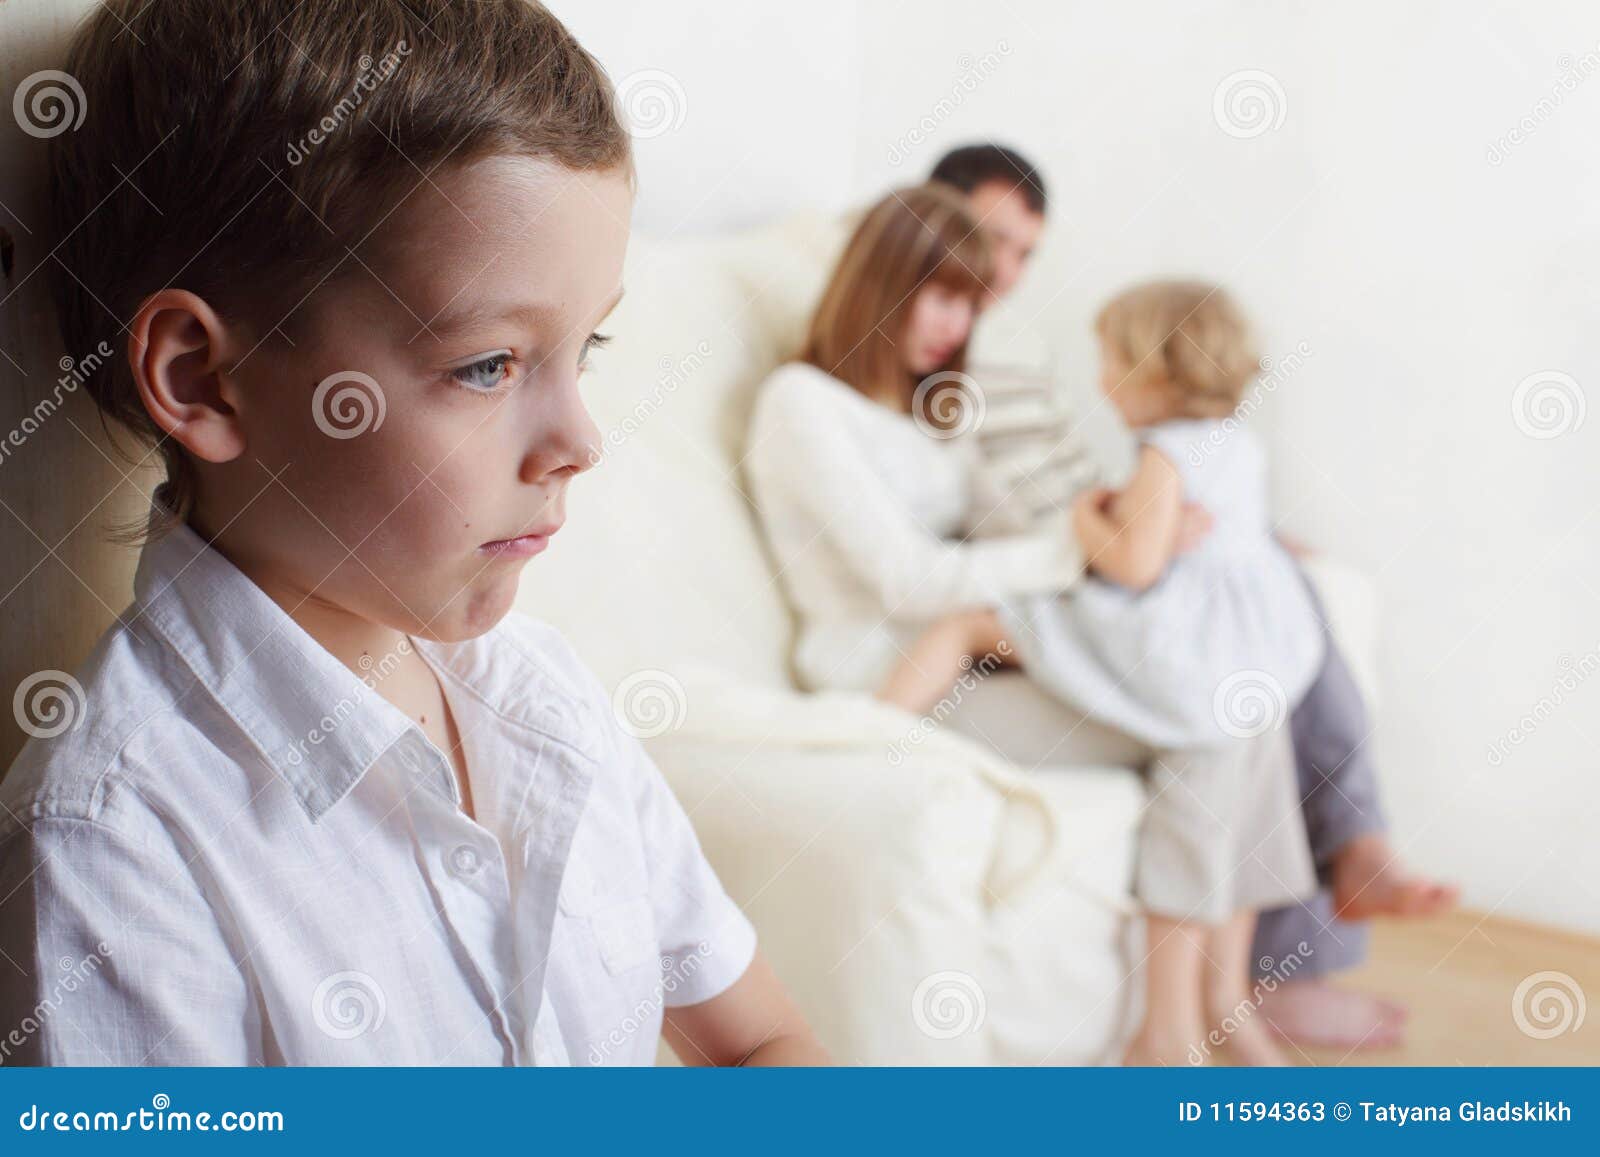 Children s jealousy stock image. Image of adult